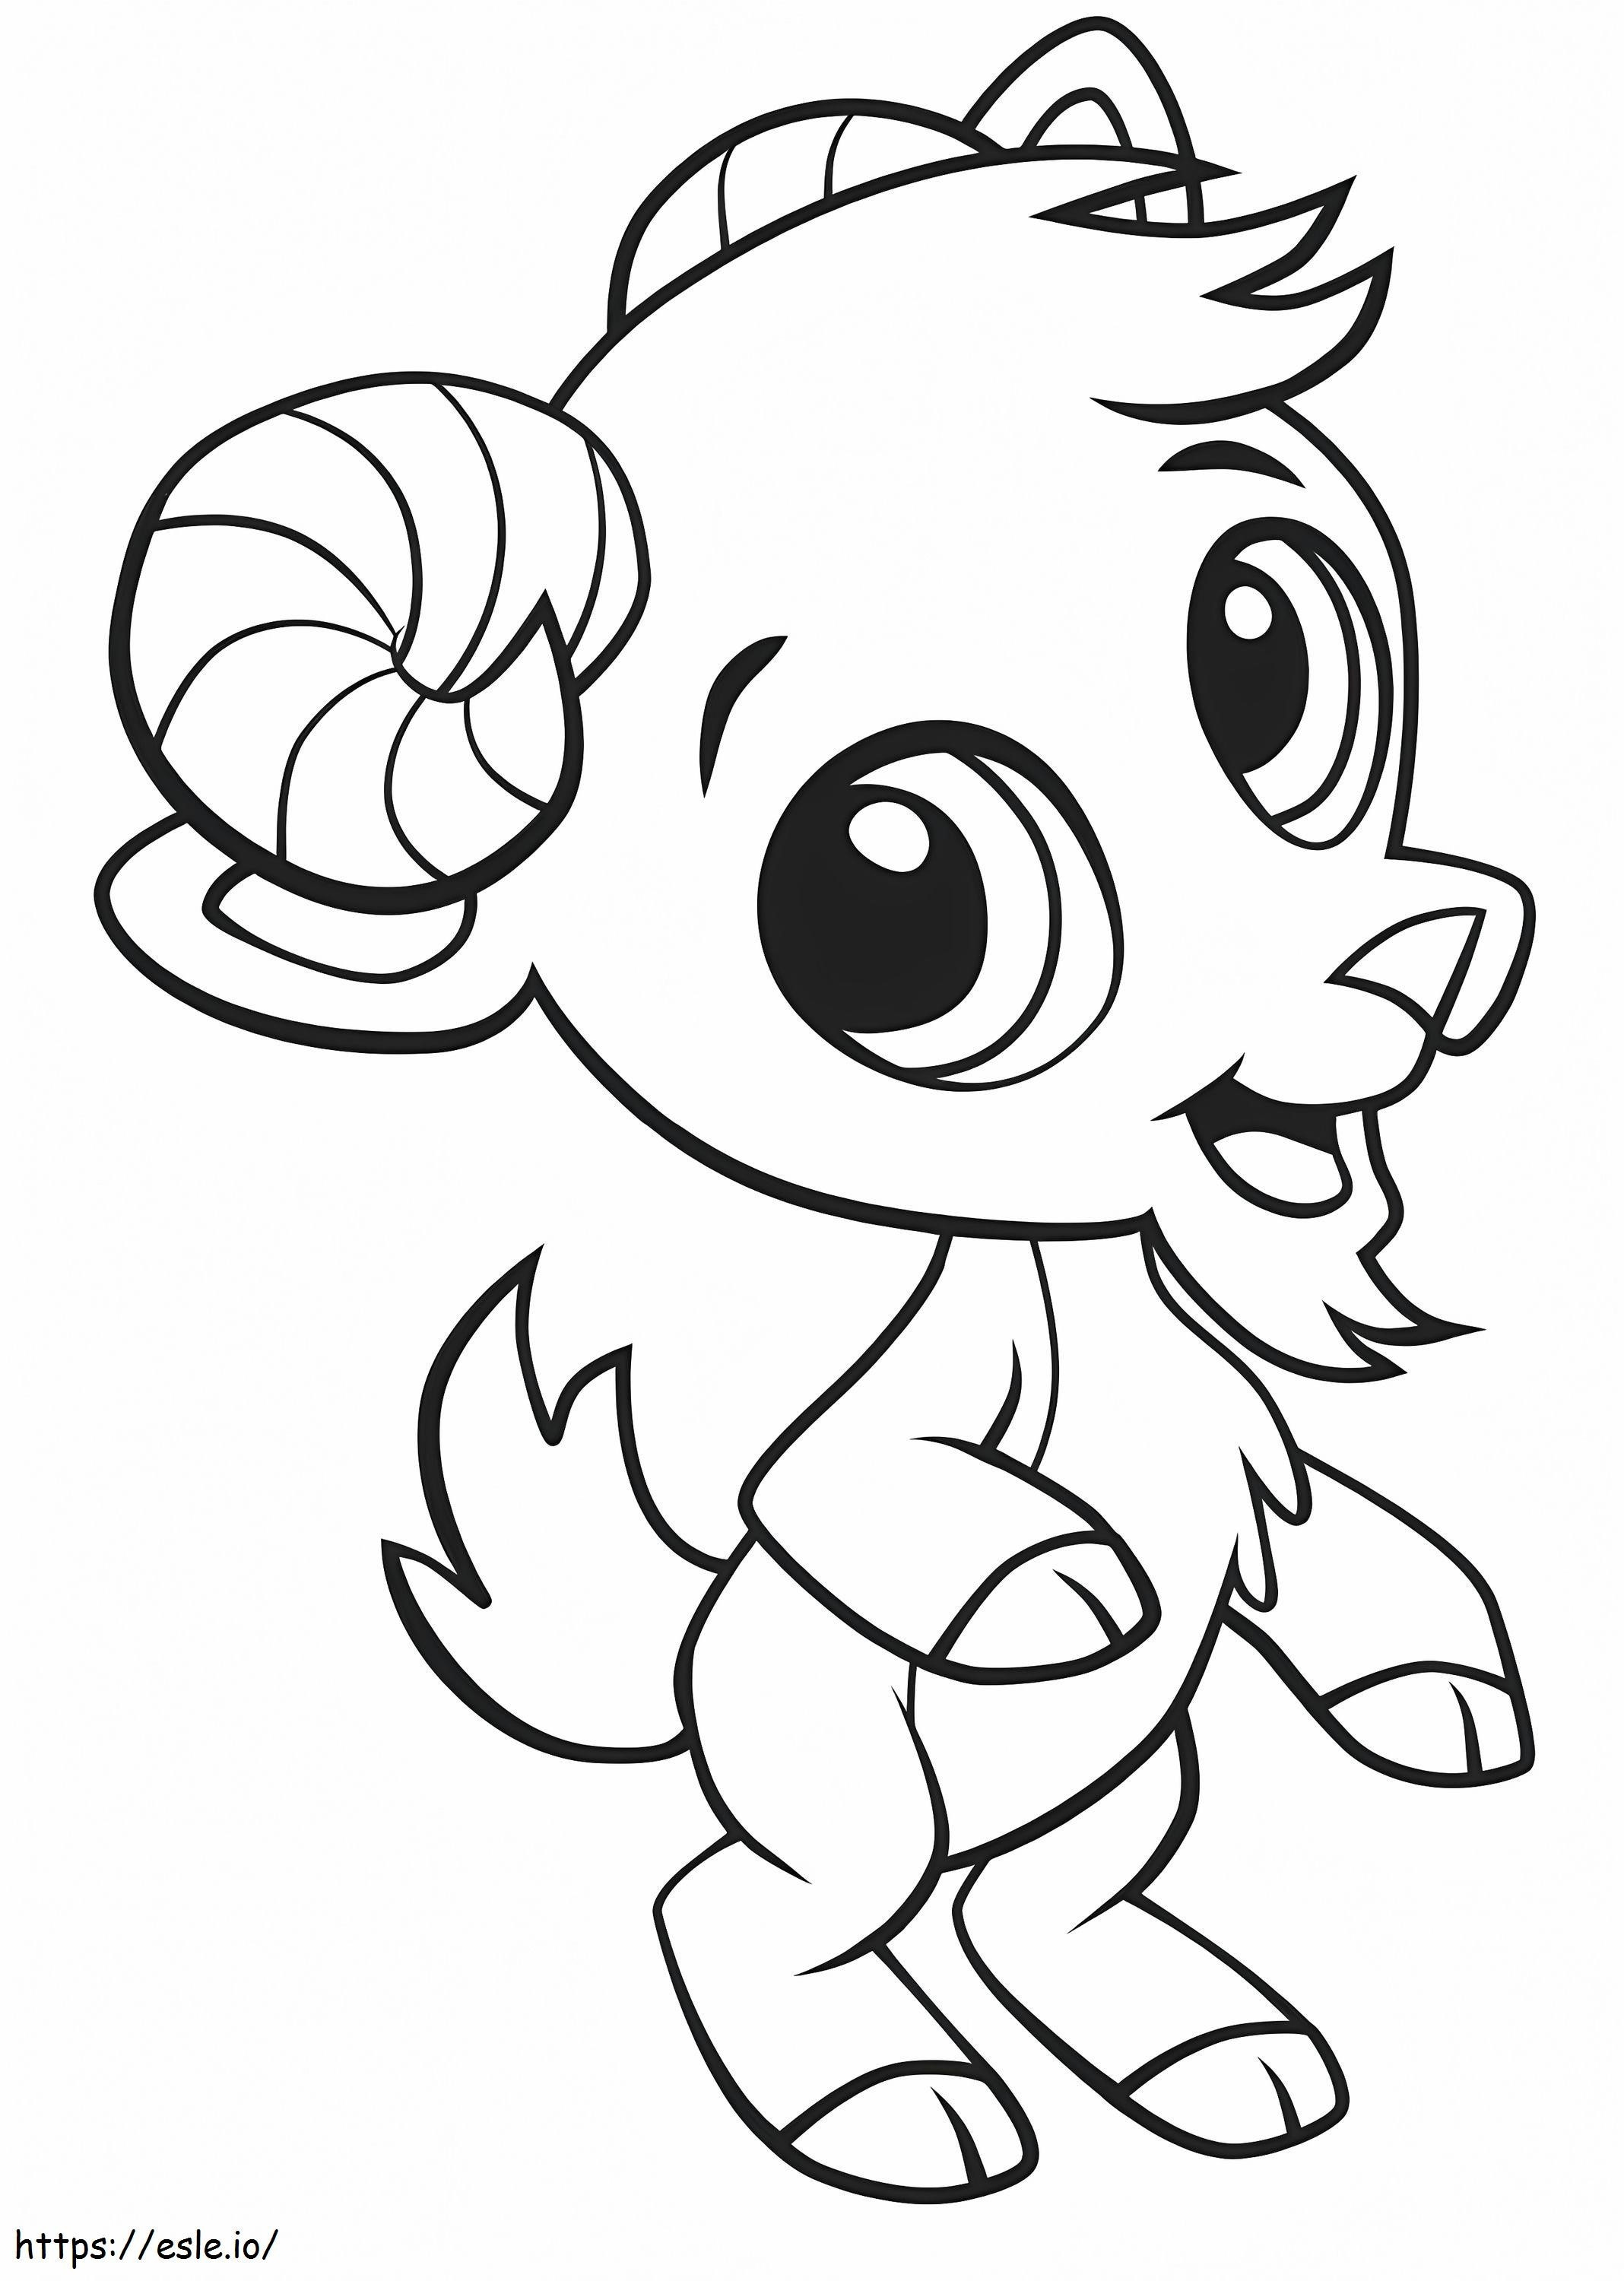 1559984287 Goat A4 coloring page